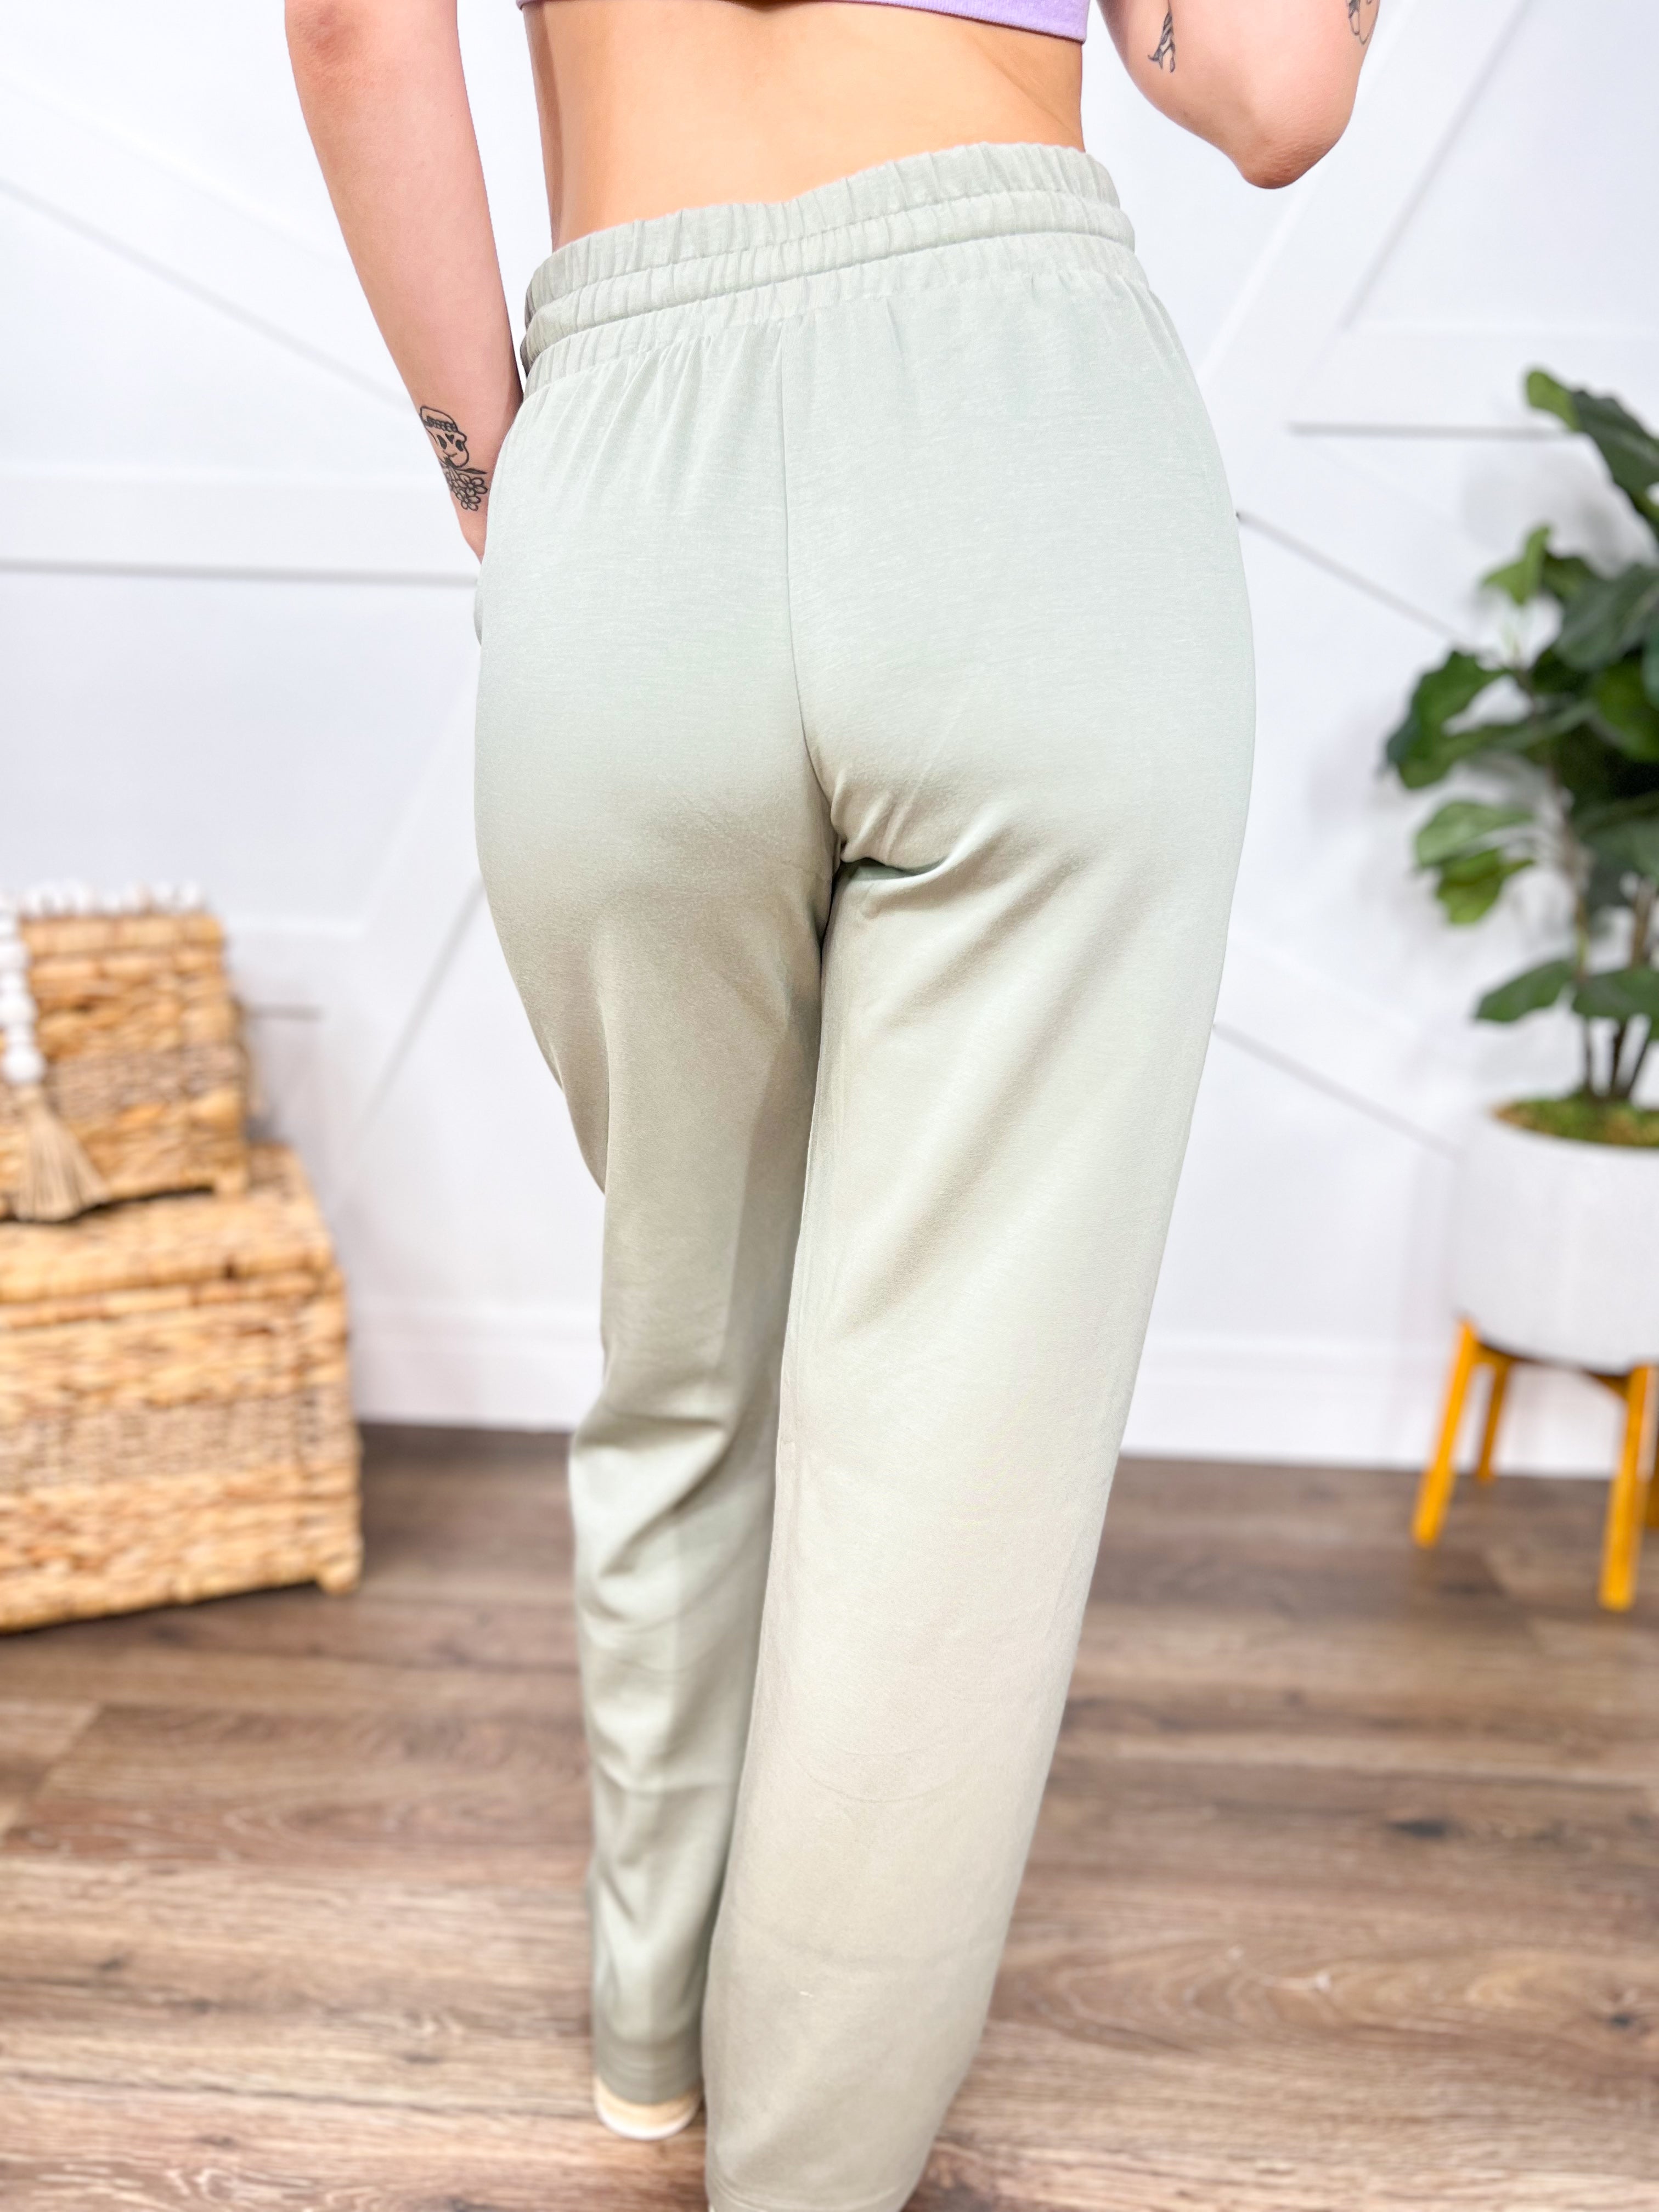 RESTOCK: No Business Lounge Pants-150 PANTS-Rae Mode-Heathered Boho Boutique, Women's Fashion and Accessories in Palmetto, FL